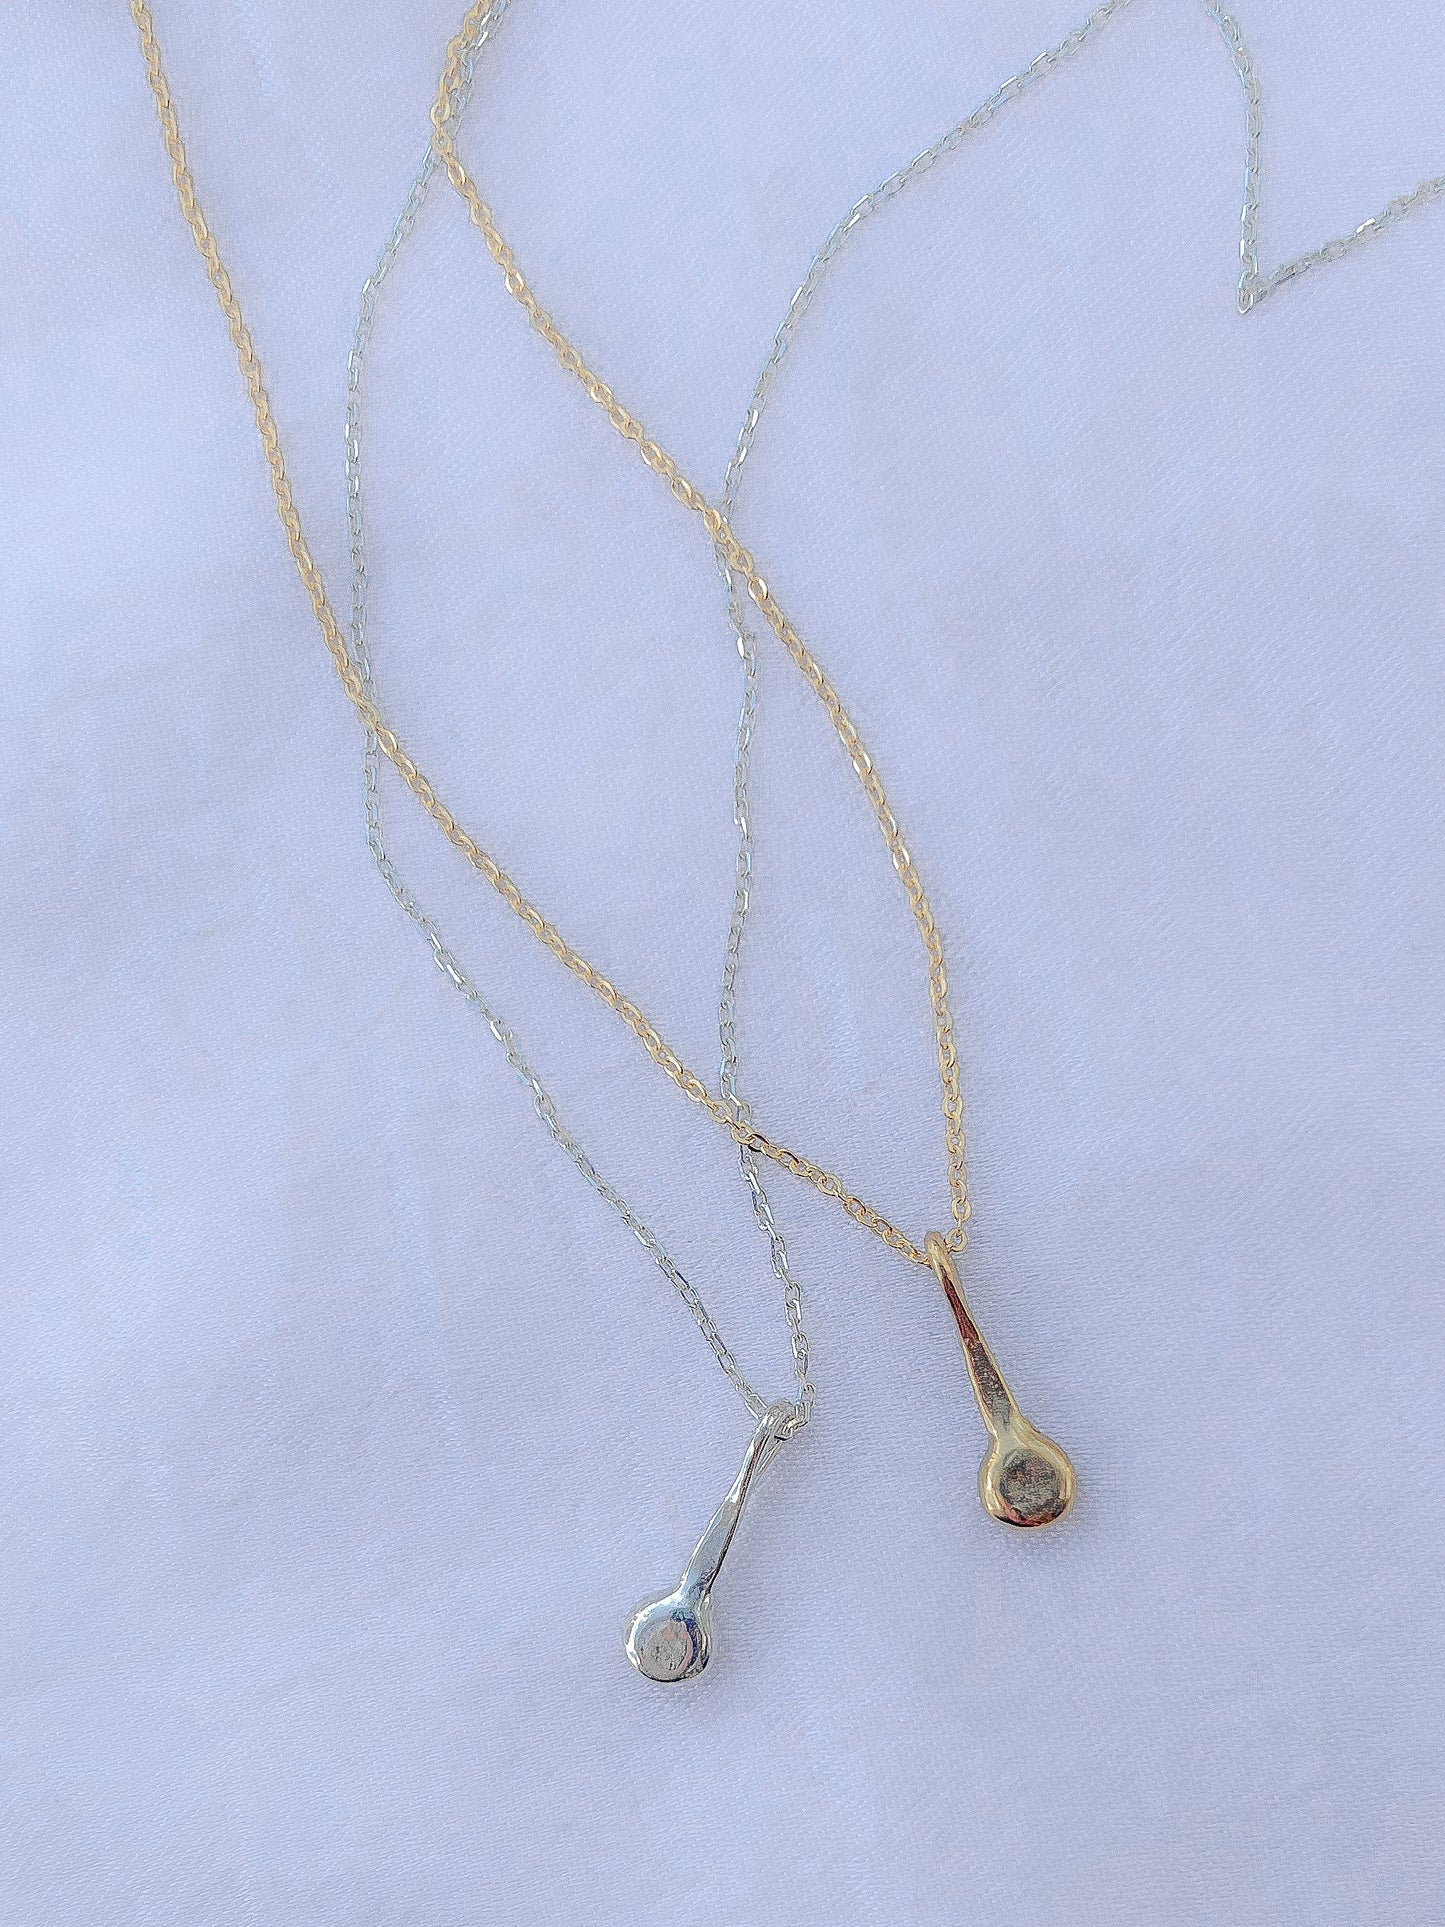 Handmade simple talisman necklace to adorn your neck. Sustainably made in northern California by Amanda Hunt.